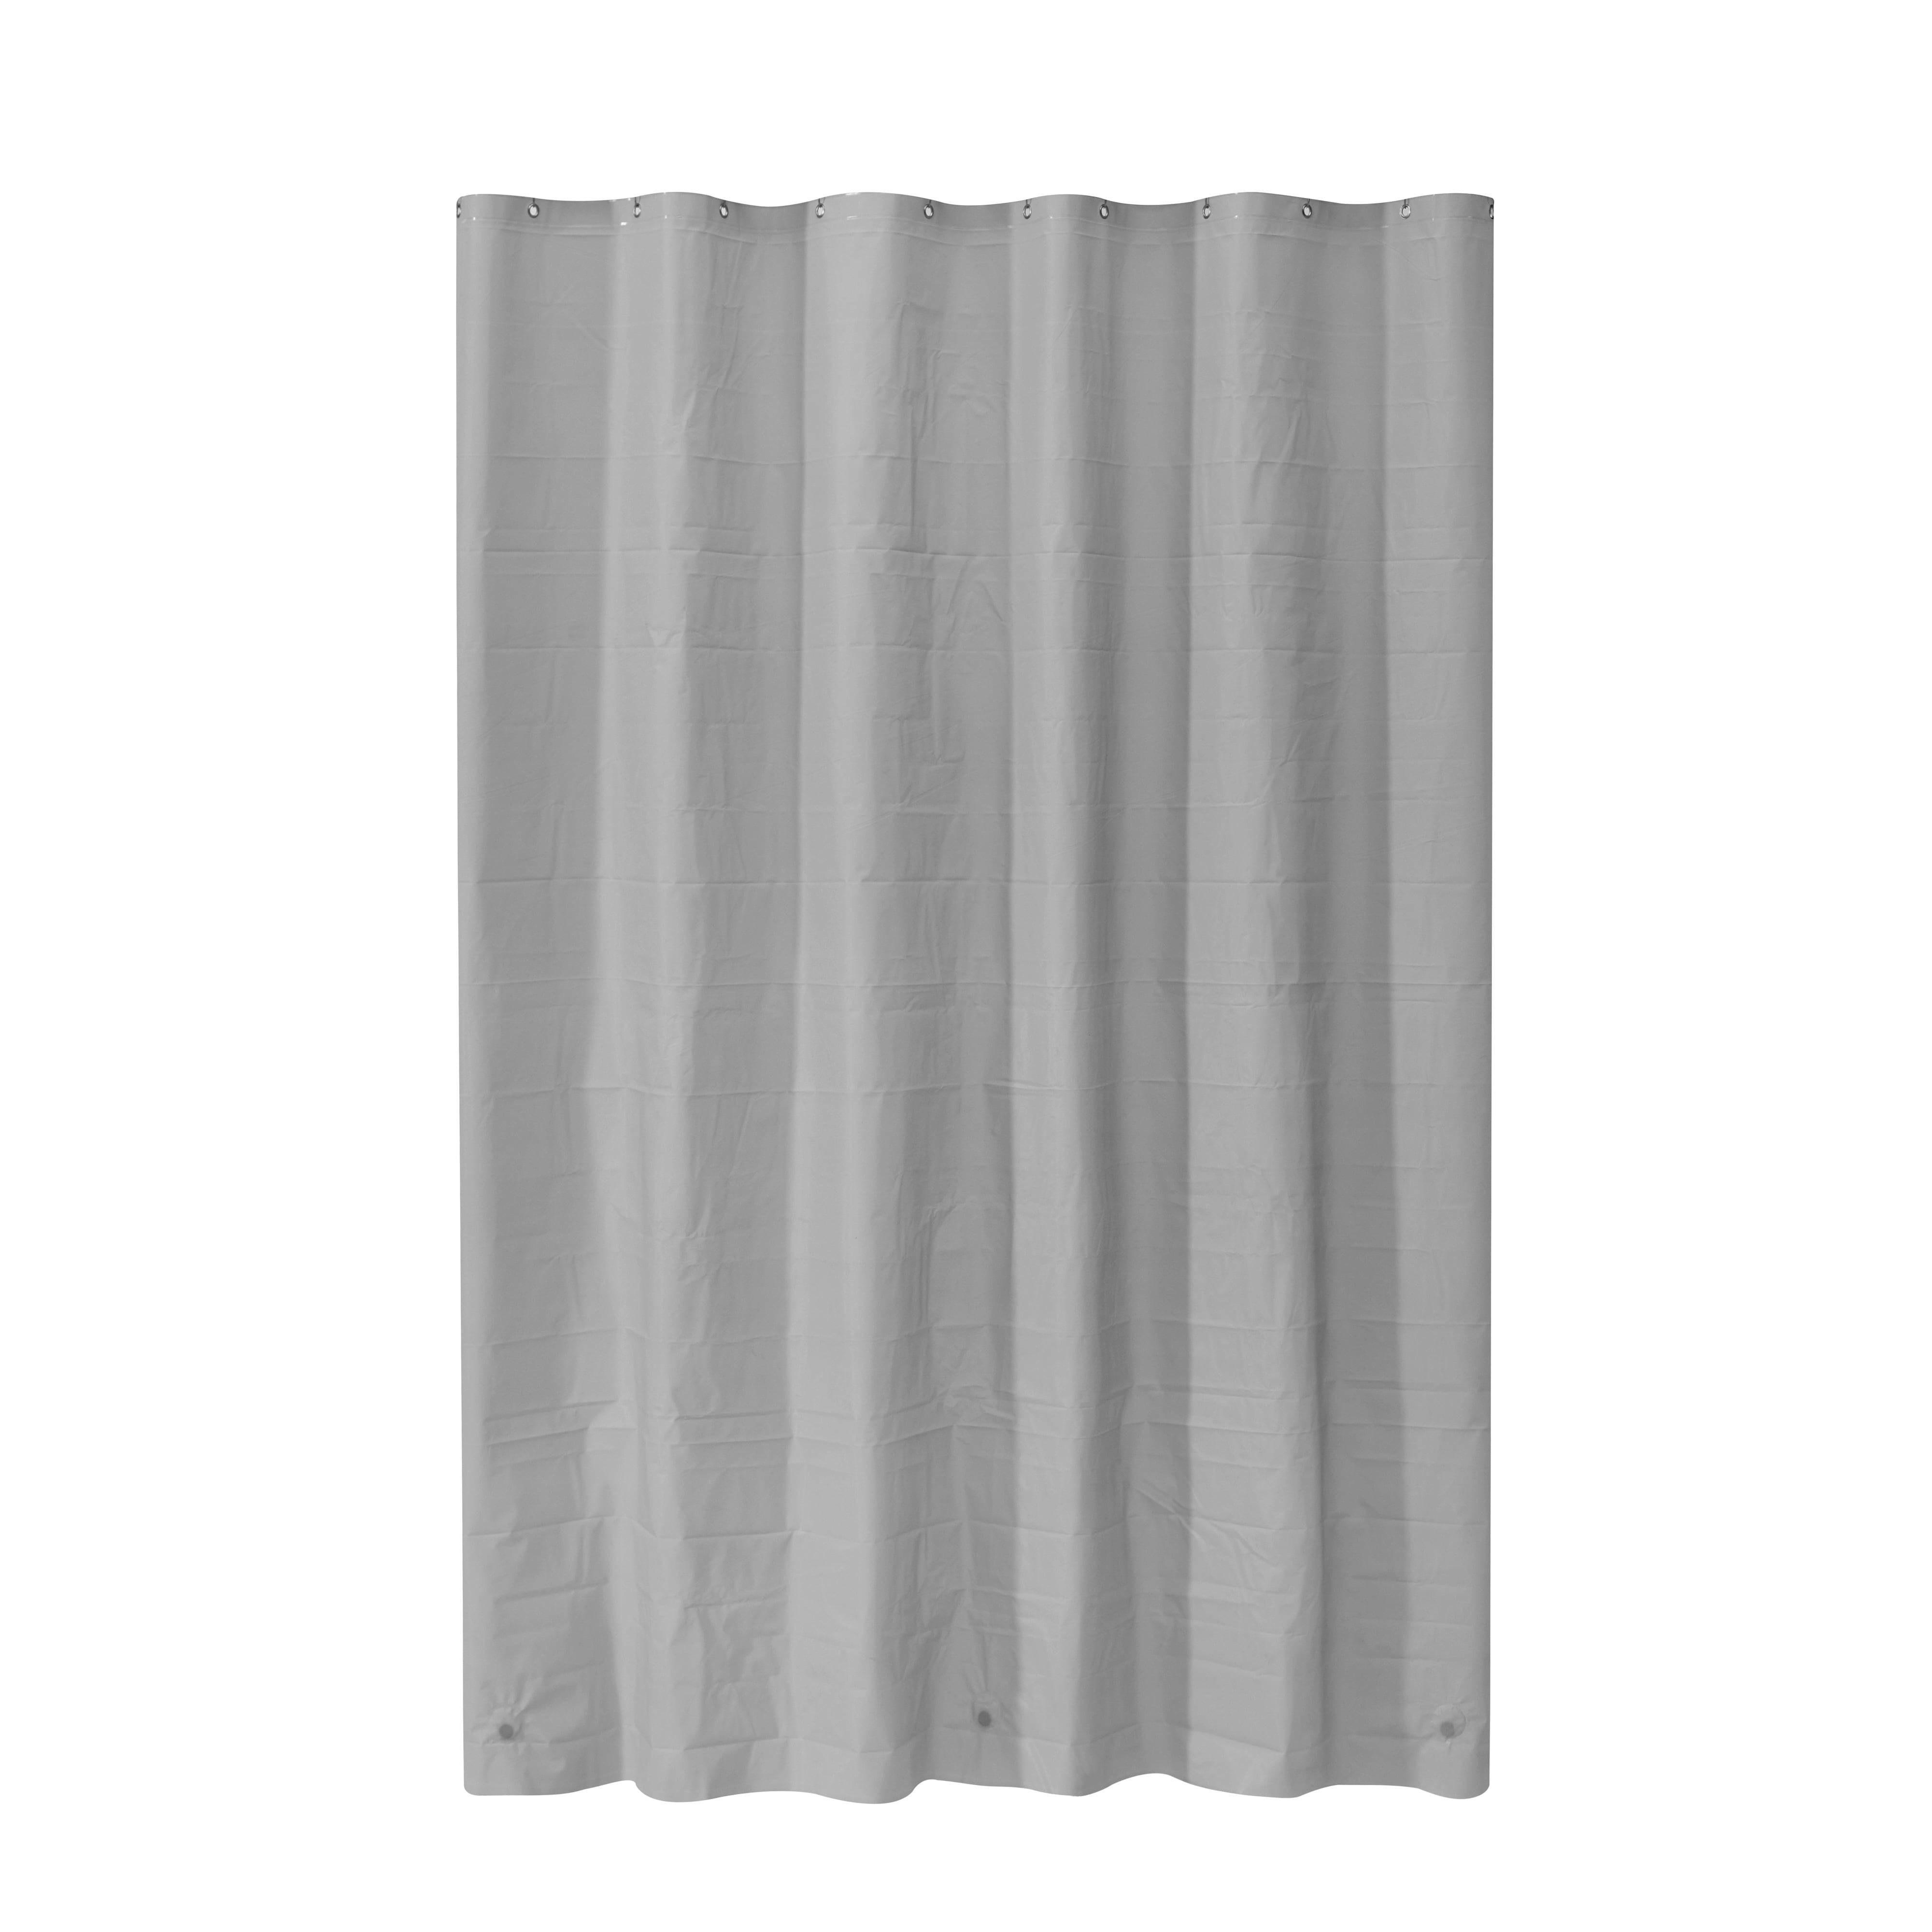 Textured Blue Ikat Shower Curtain Threshold 100 Cotton 72x72 Wine Gray for sale online 